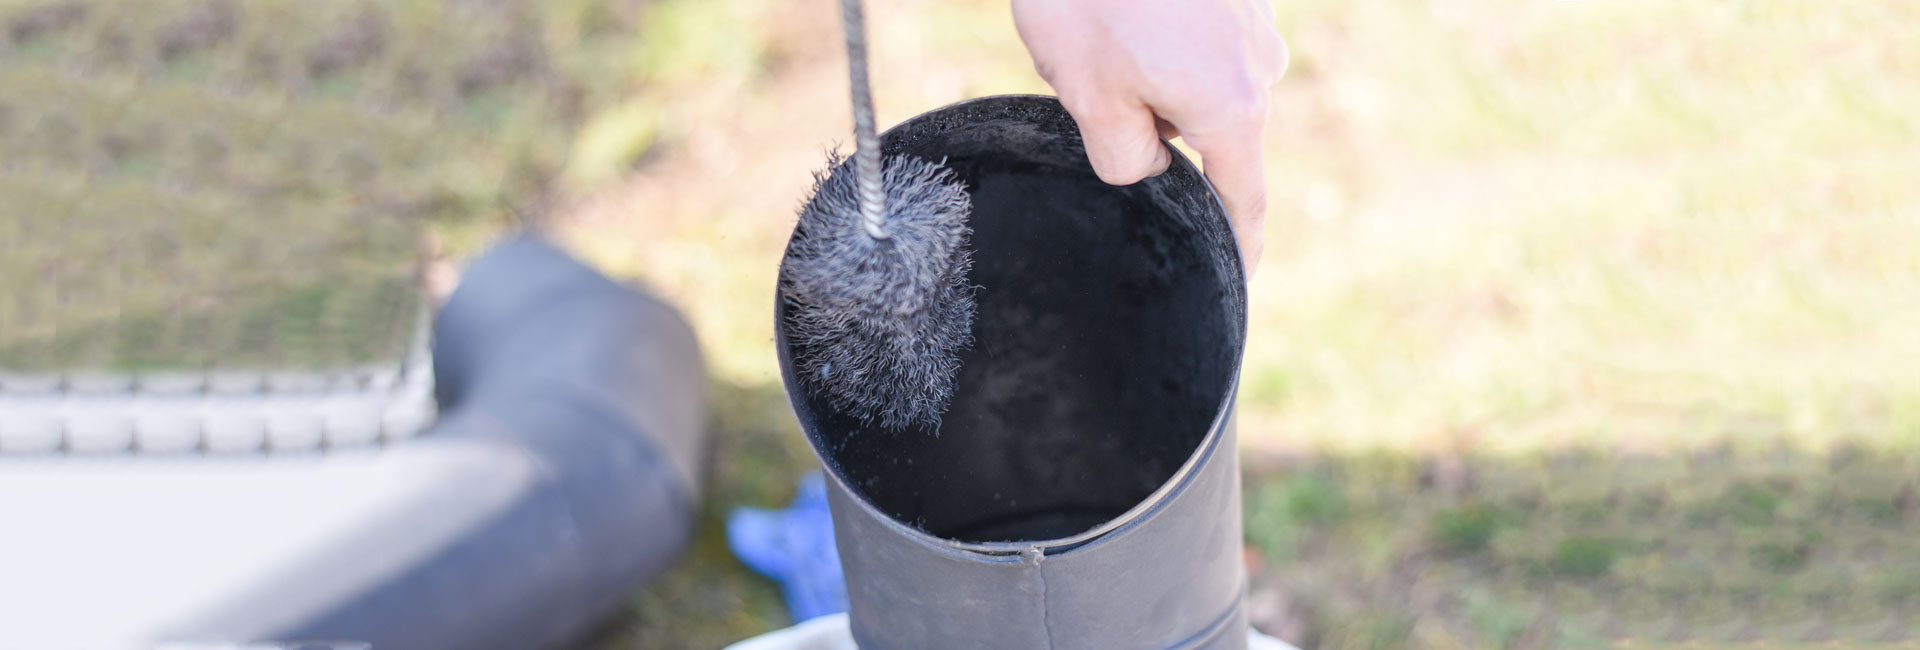 Chimney Sweep Cleaning